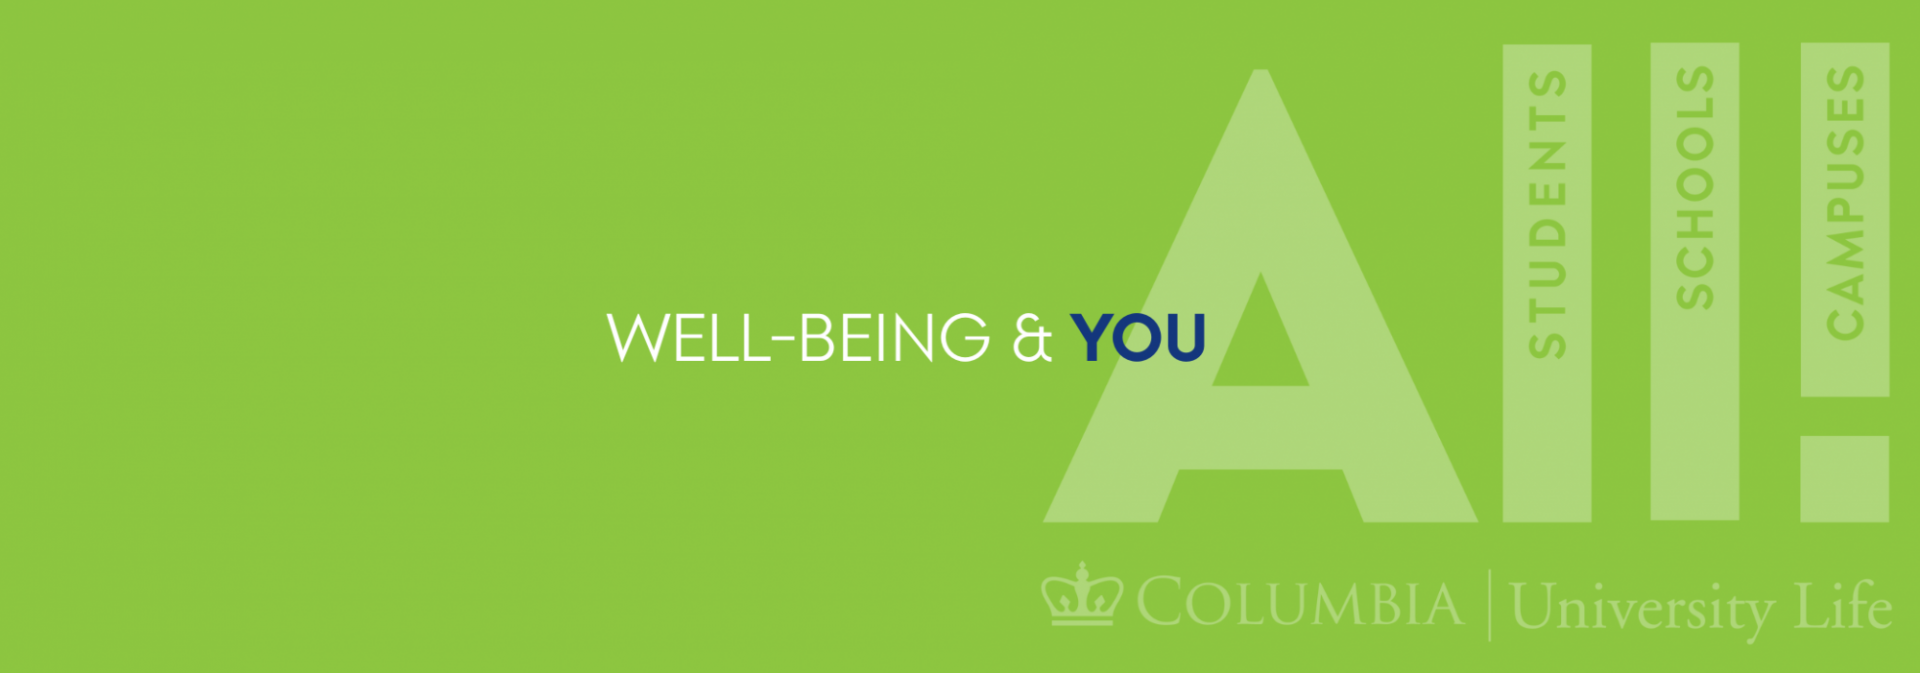 Well-being & You